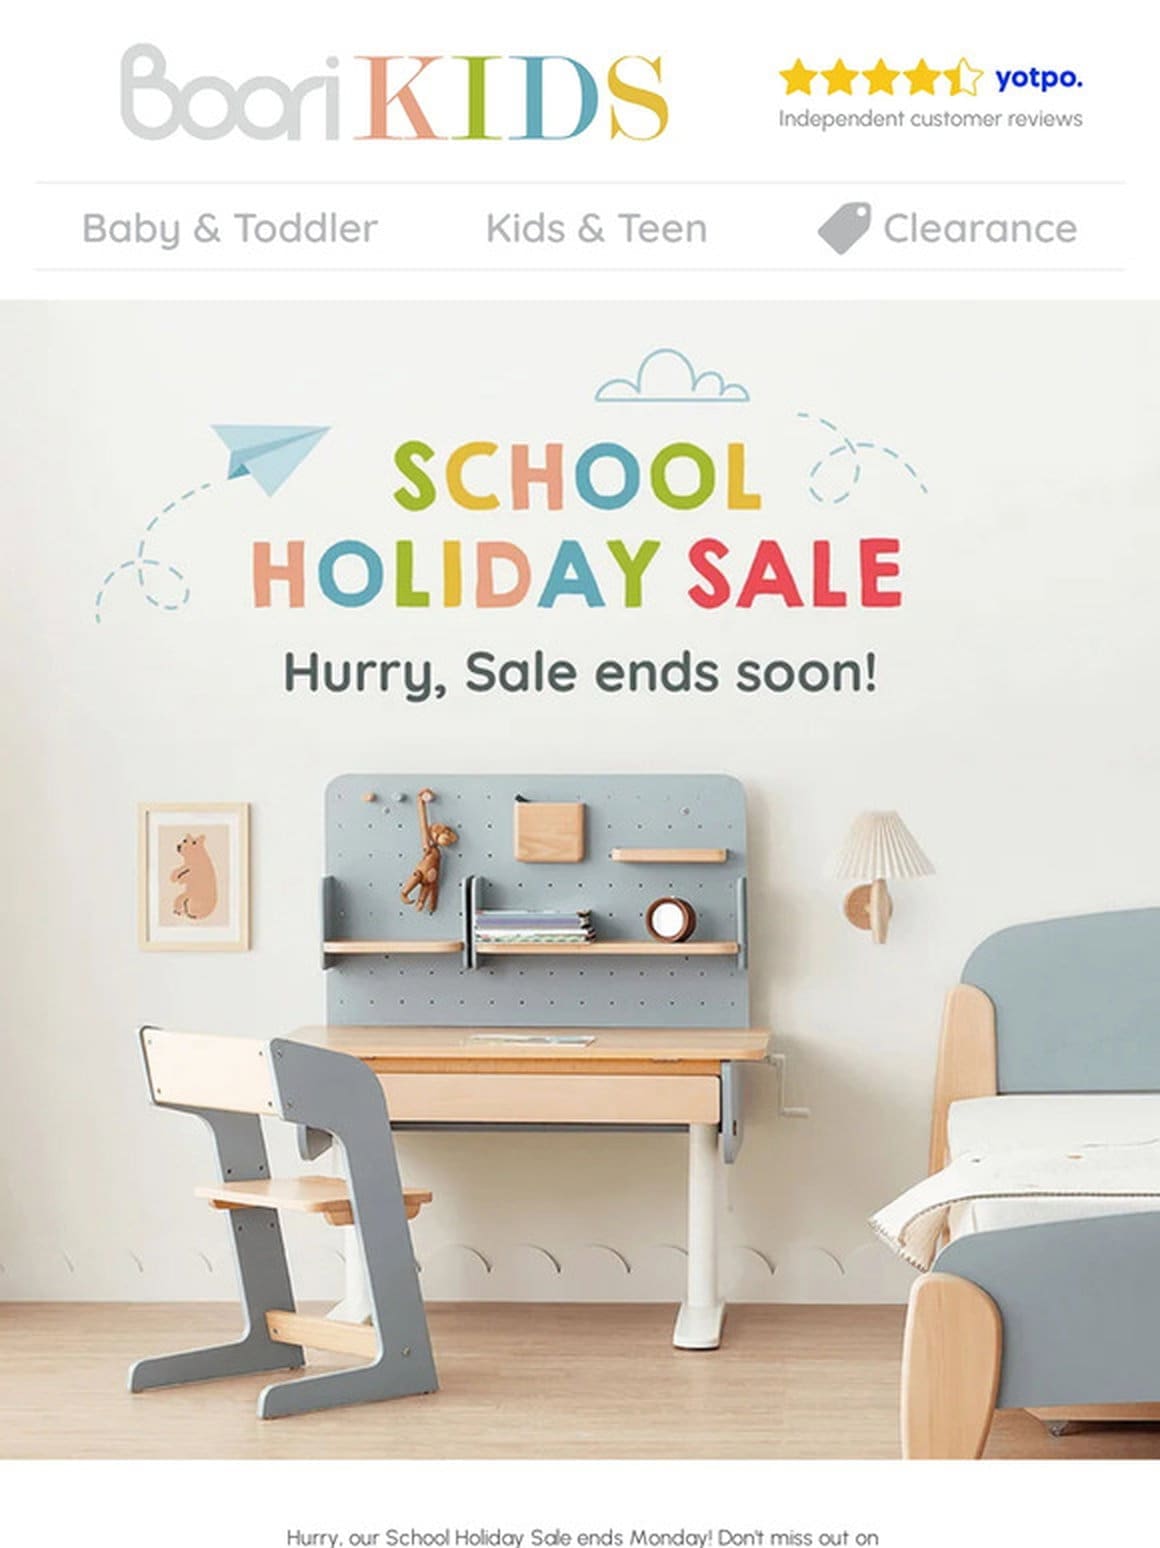 School Holiday Sale ends Monday!